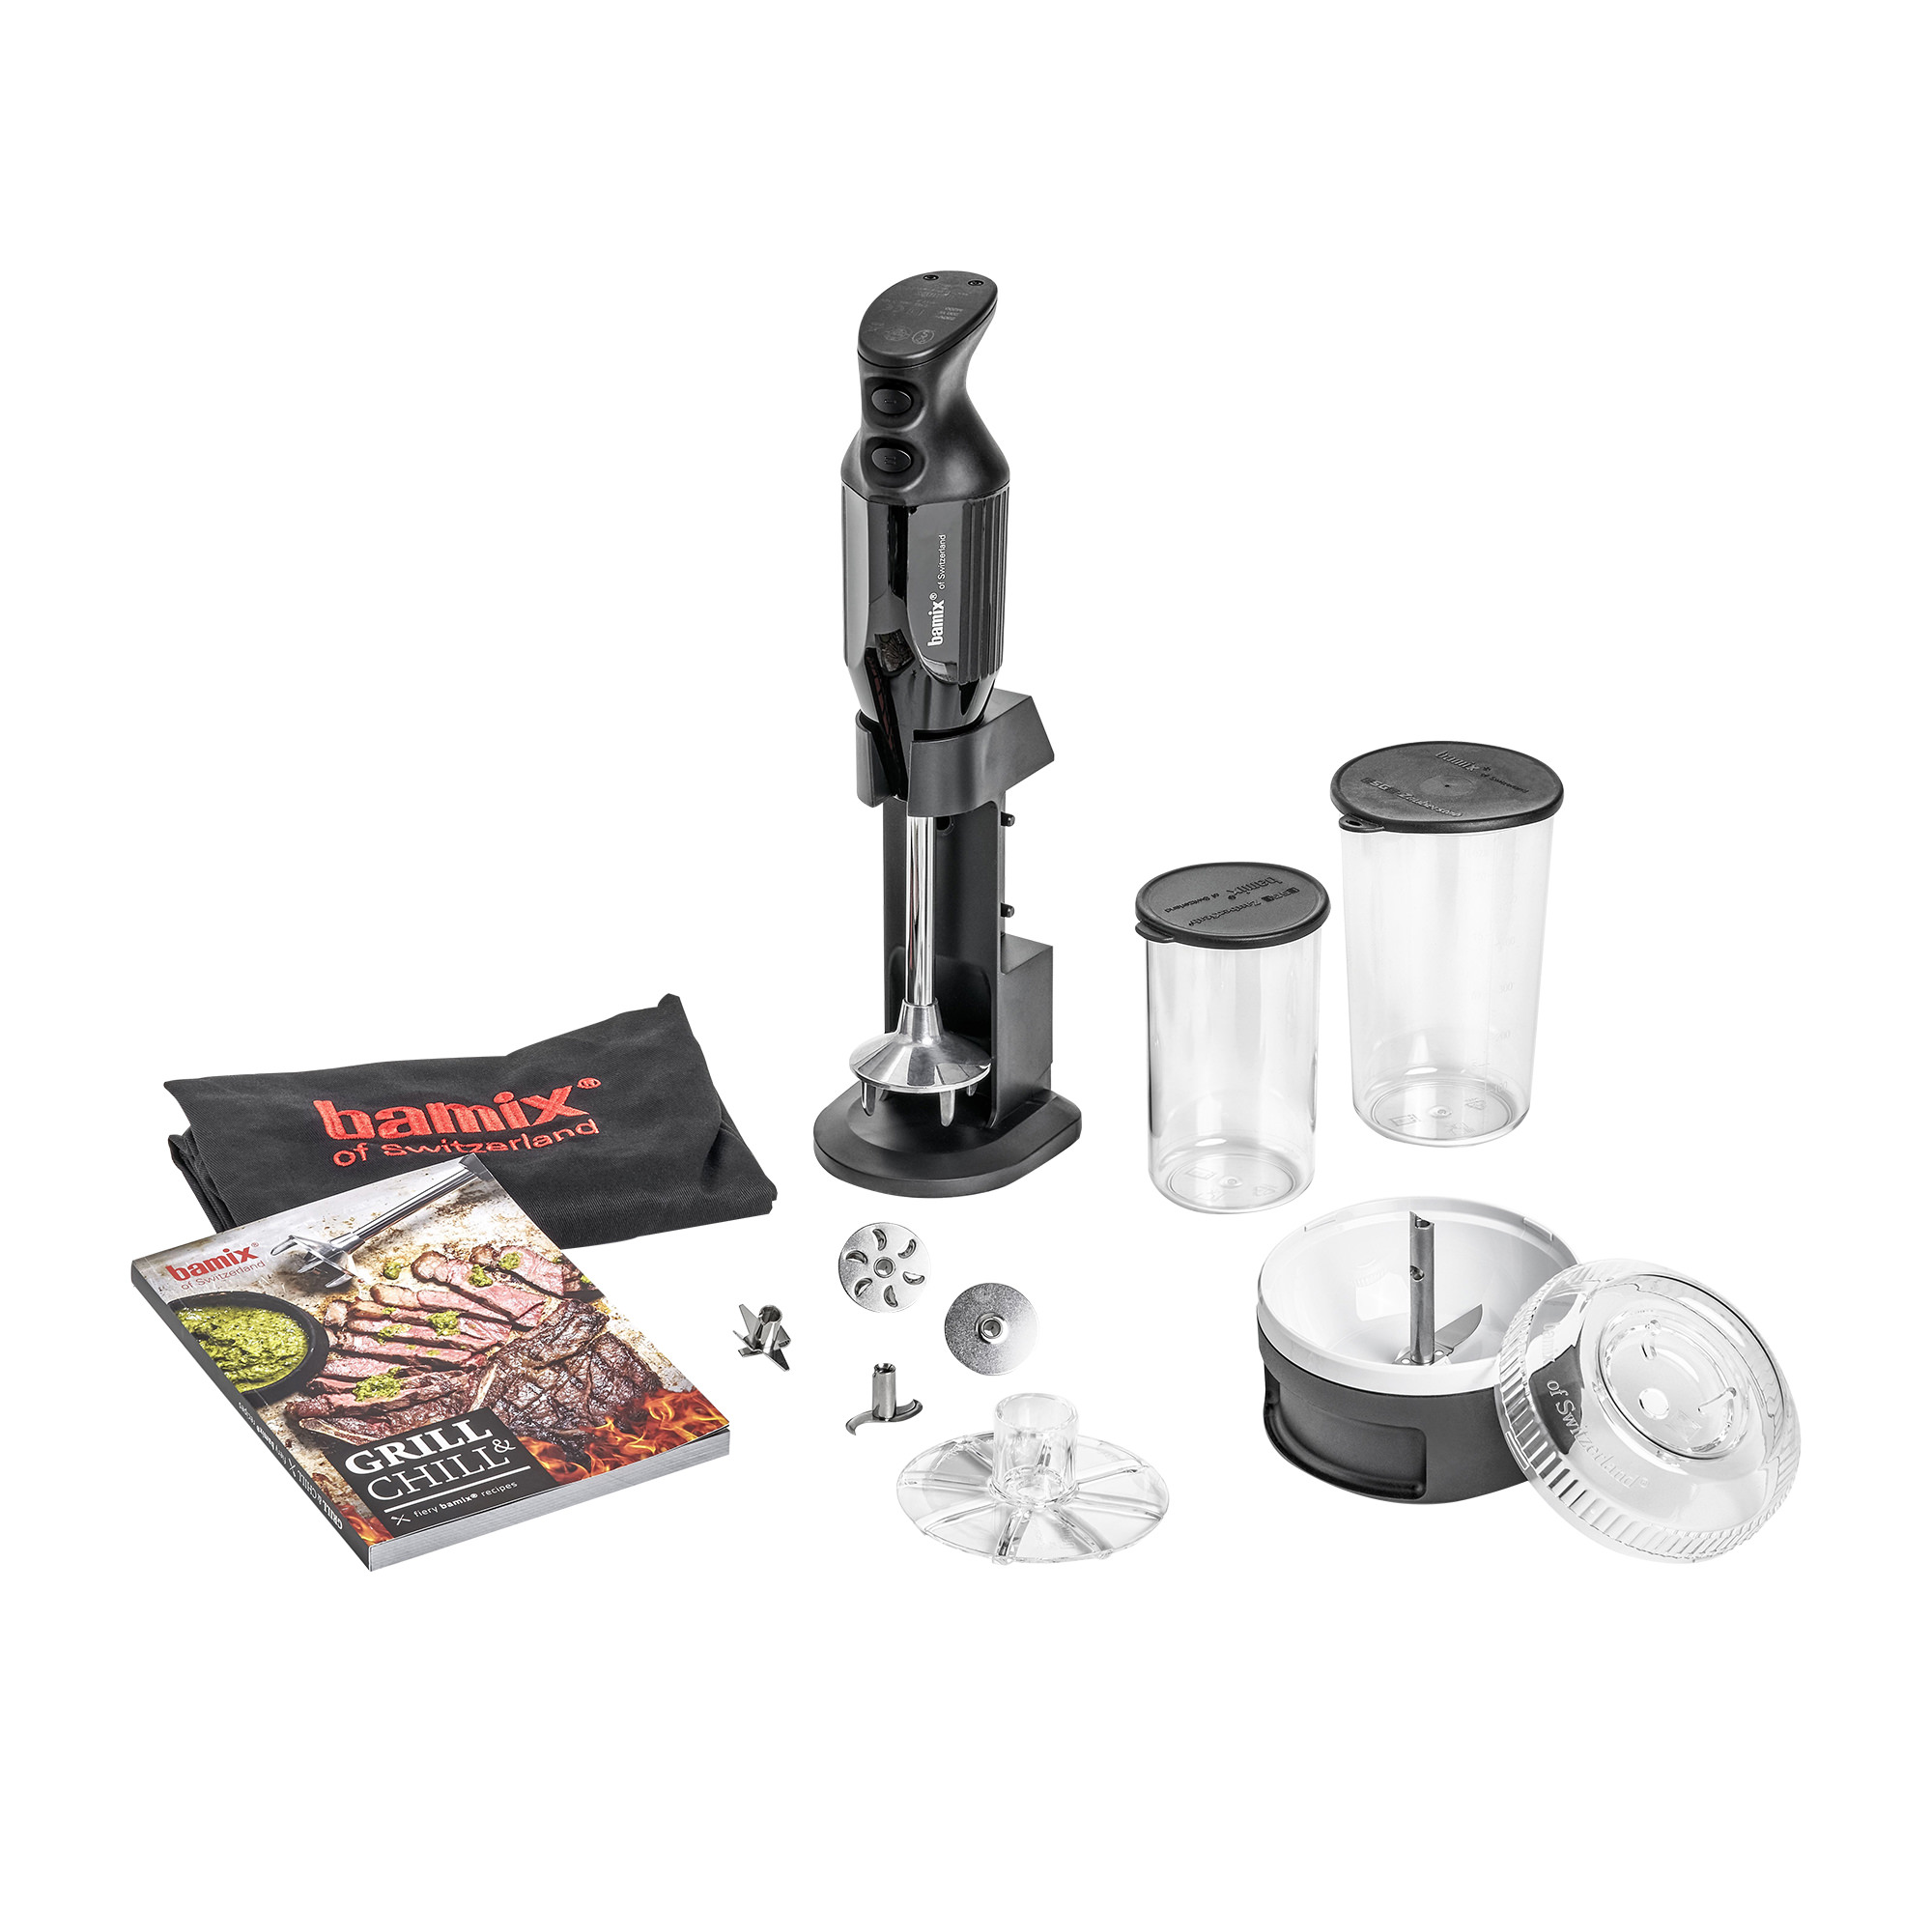 Bamix Speciality Grill & Chill BBQ Immersion Blender 200W Black Image 1